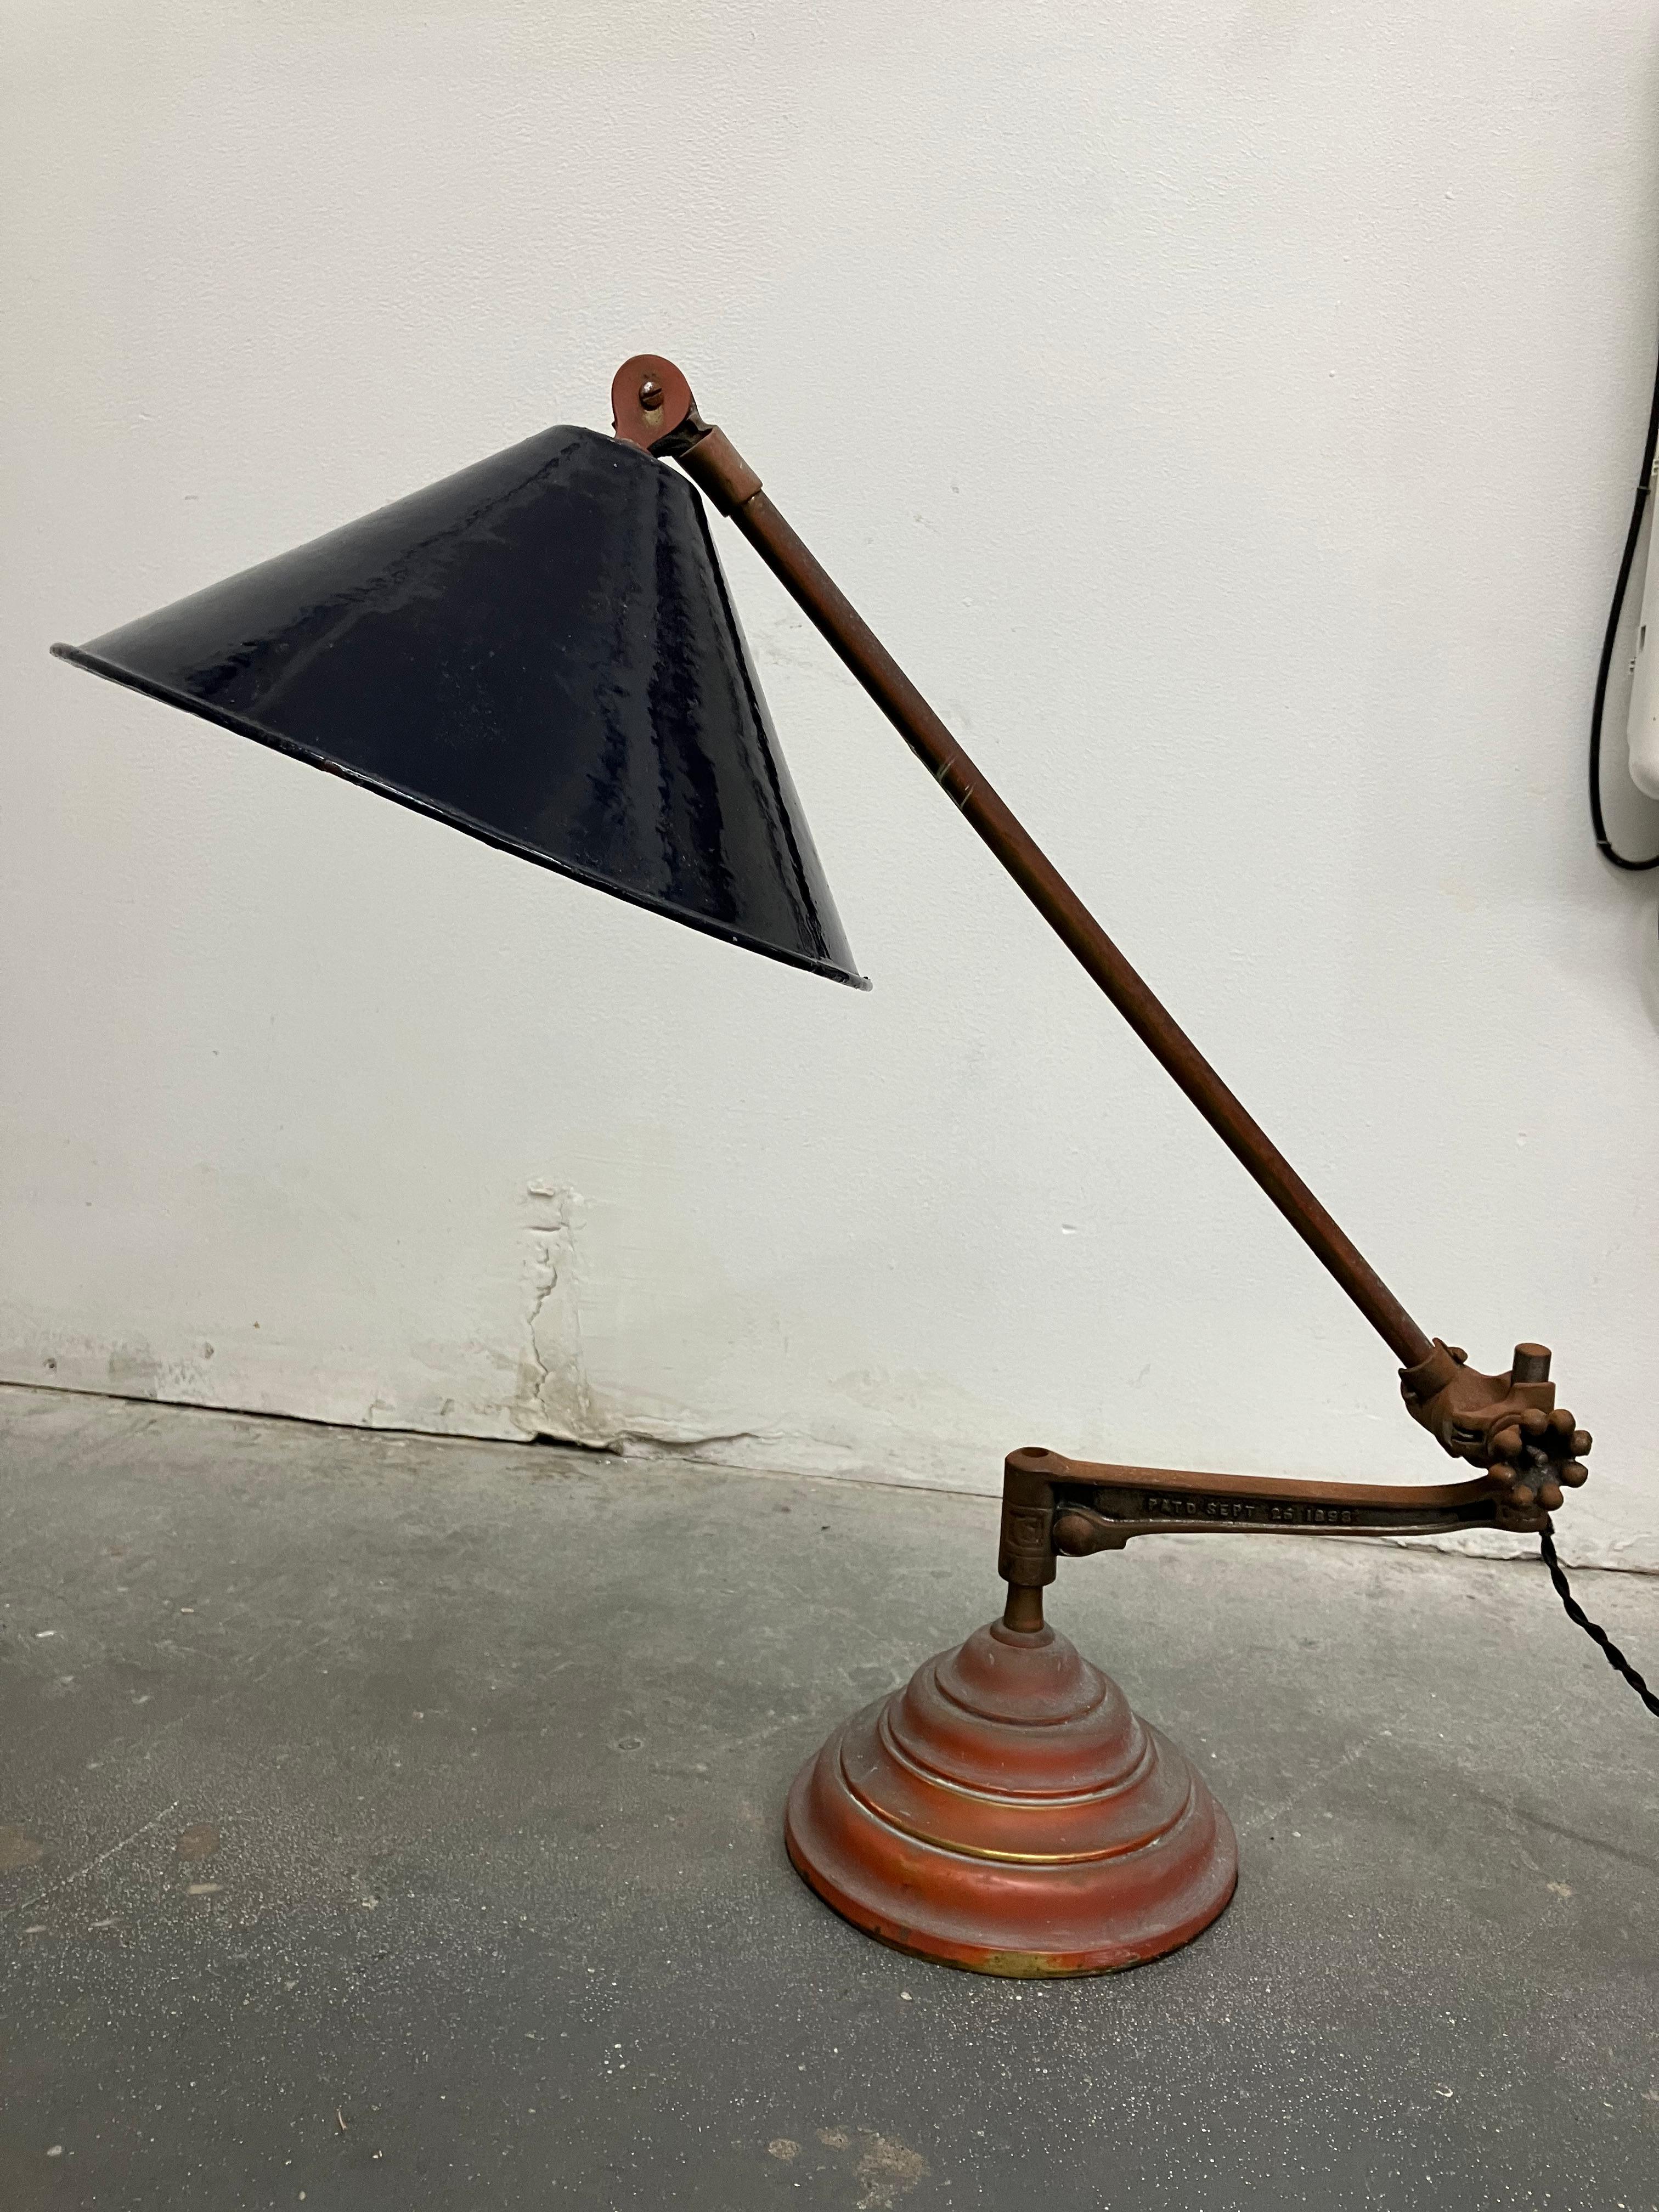 Cobalt blue enameled shade, brass arm and base, and cast iron center arm. Really great combination of materials and style. The pieces can be recombined to make a wall sconce or clamp lamp. Stamped OC White on each piece with an 1889 patent